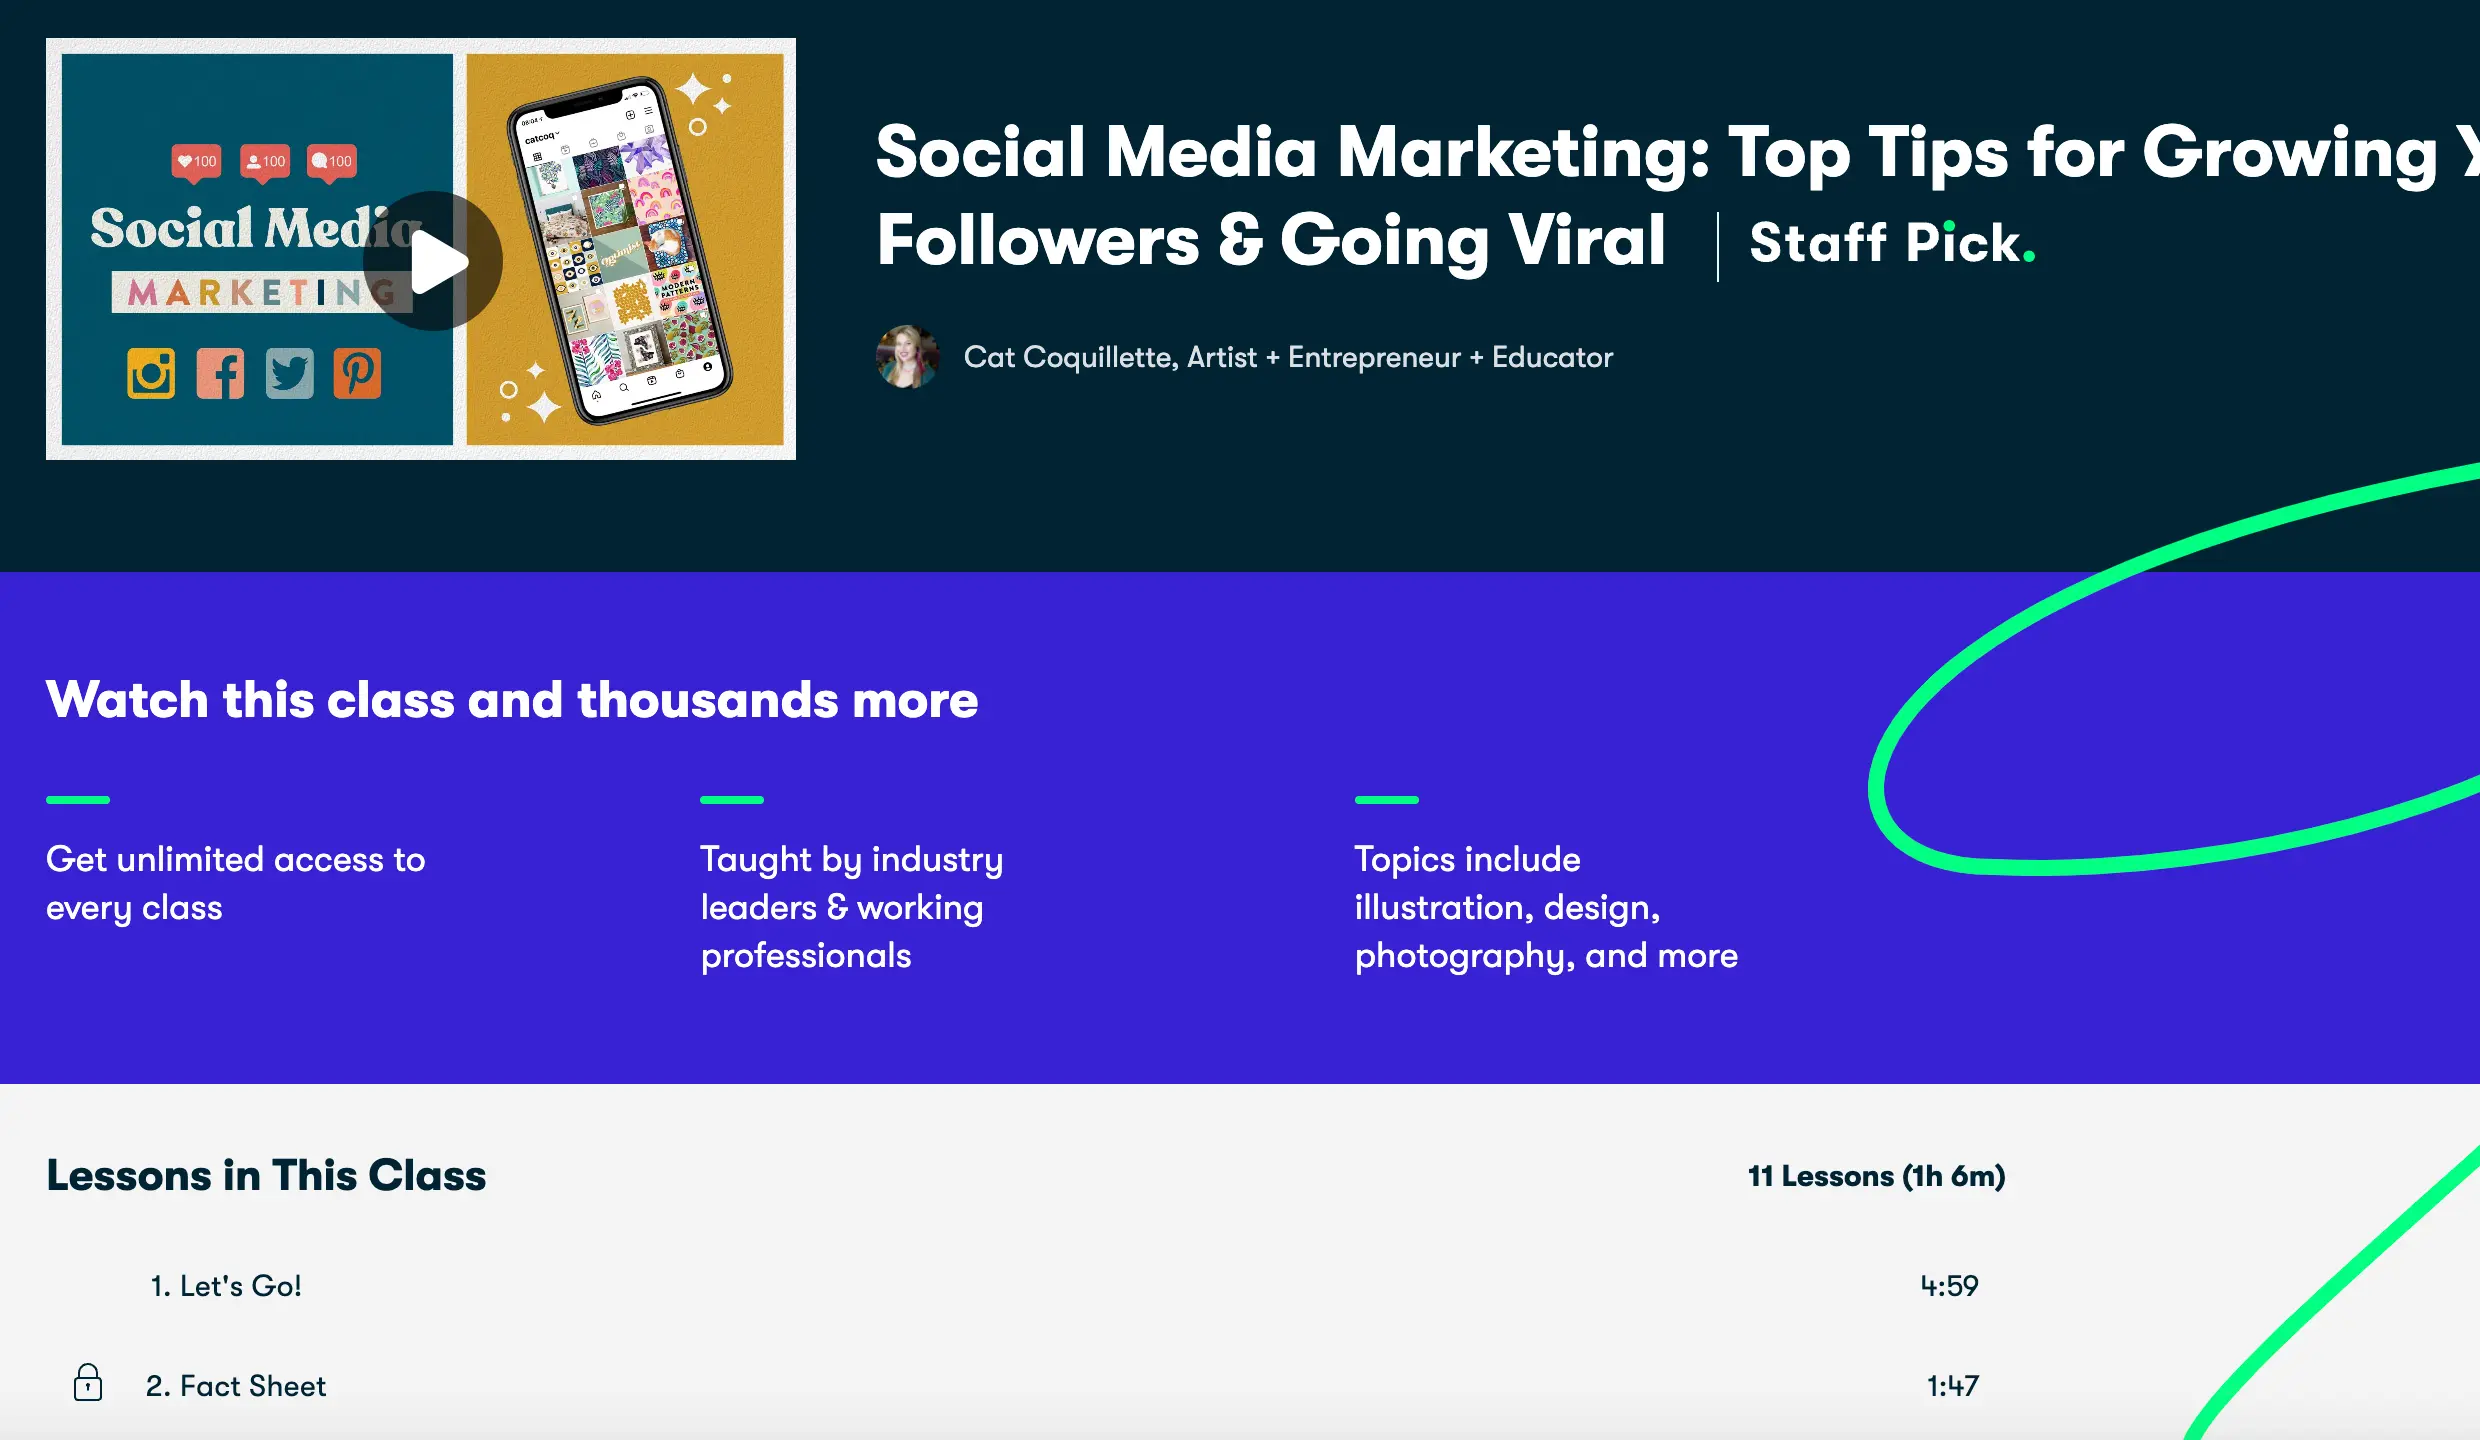 Social Media Marketing: Top Tips for Growing Your Followers & Going Viral